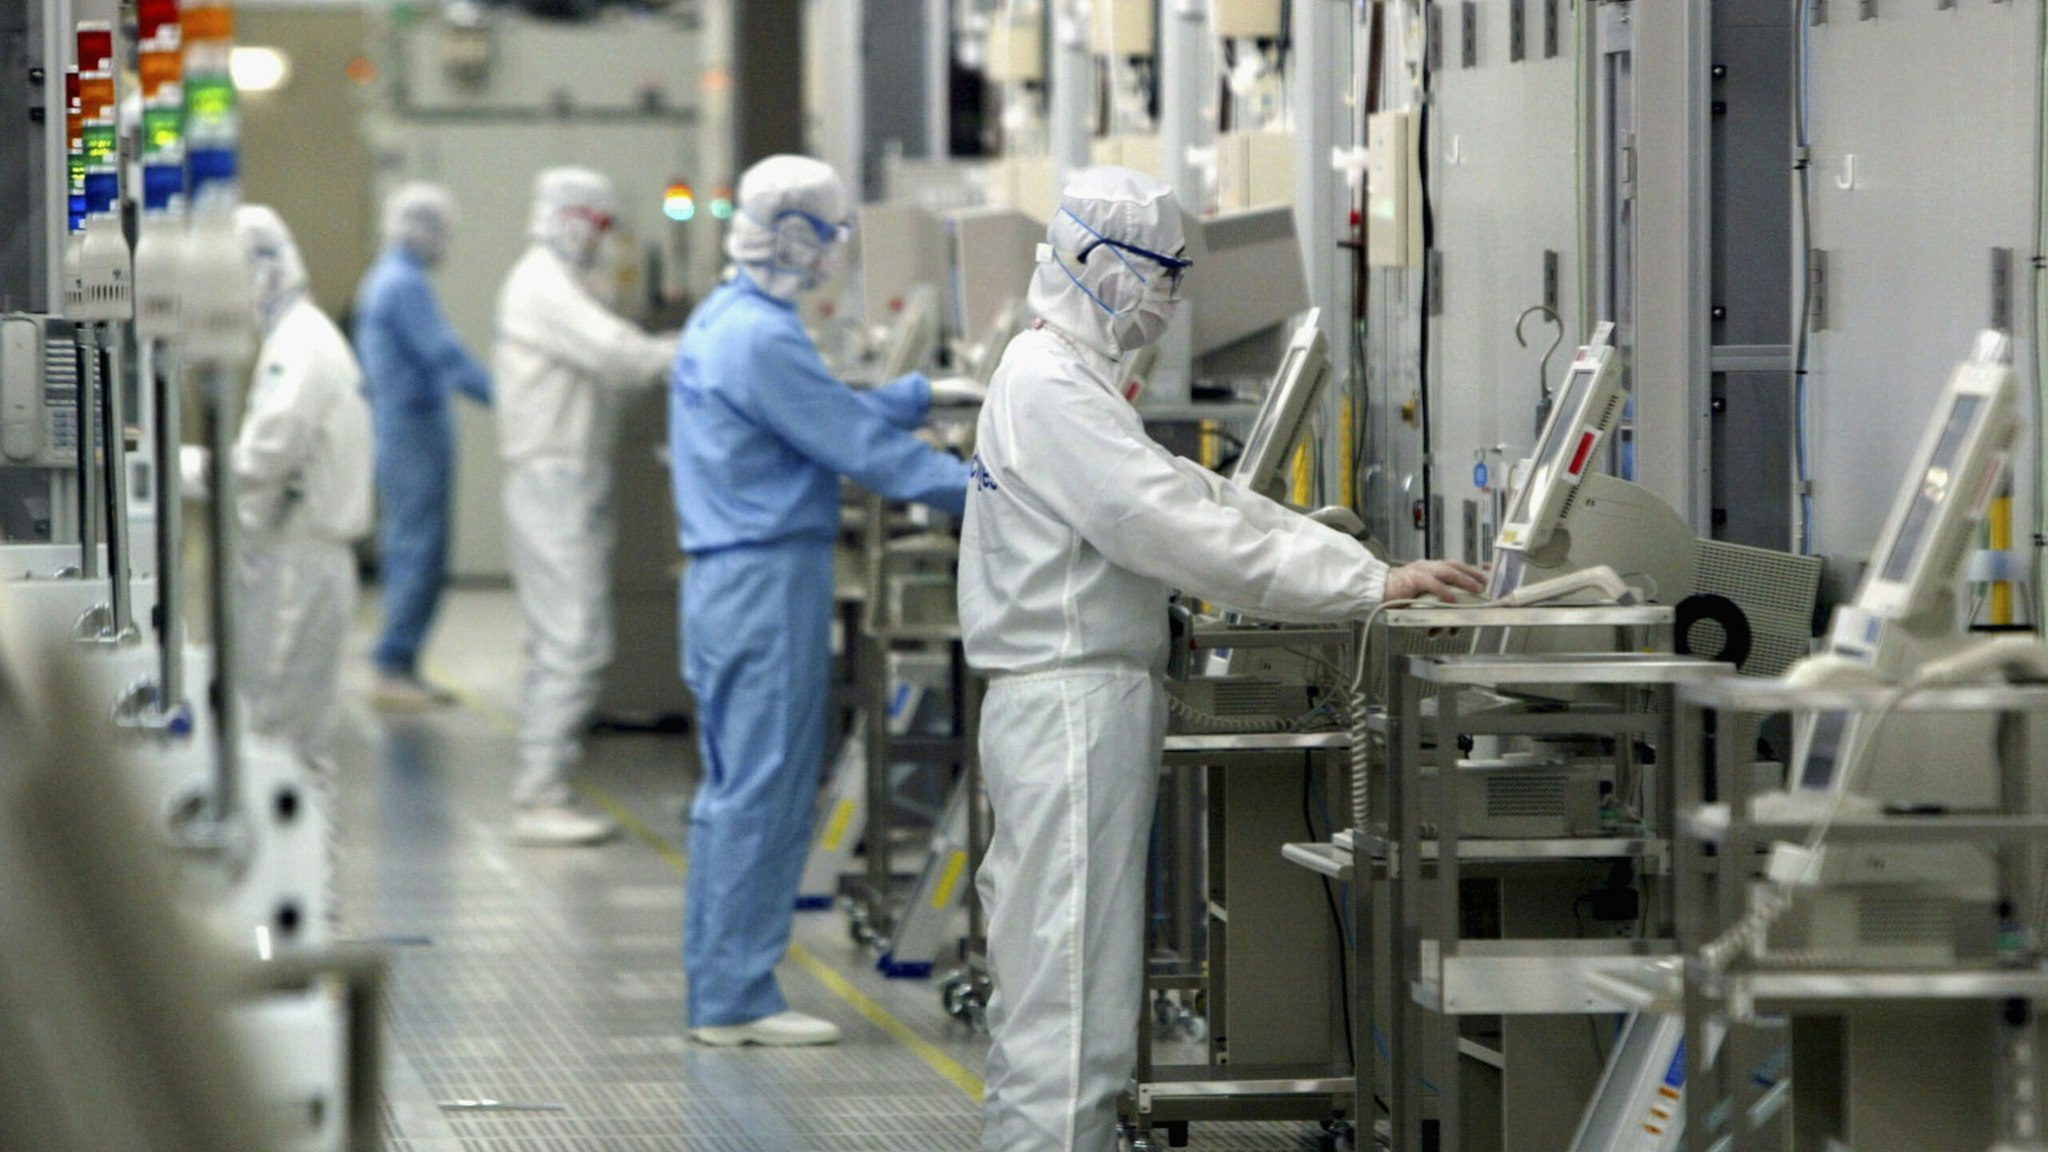 Technicians at work in the clean room of the Fab Equipment at a semiconductor company, Renesas Technology Corp. on June 17, 2004 in Ibaraki, Japan.